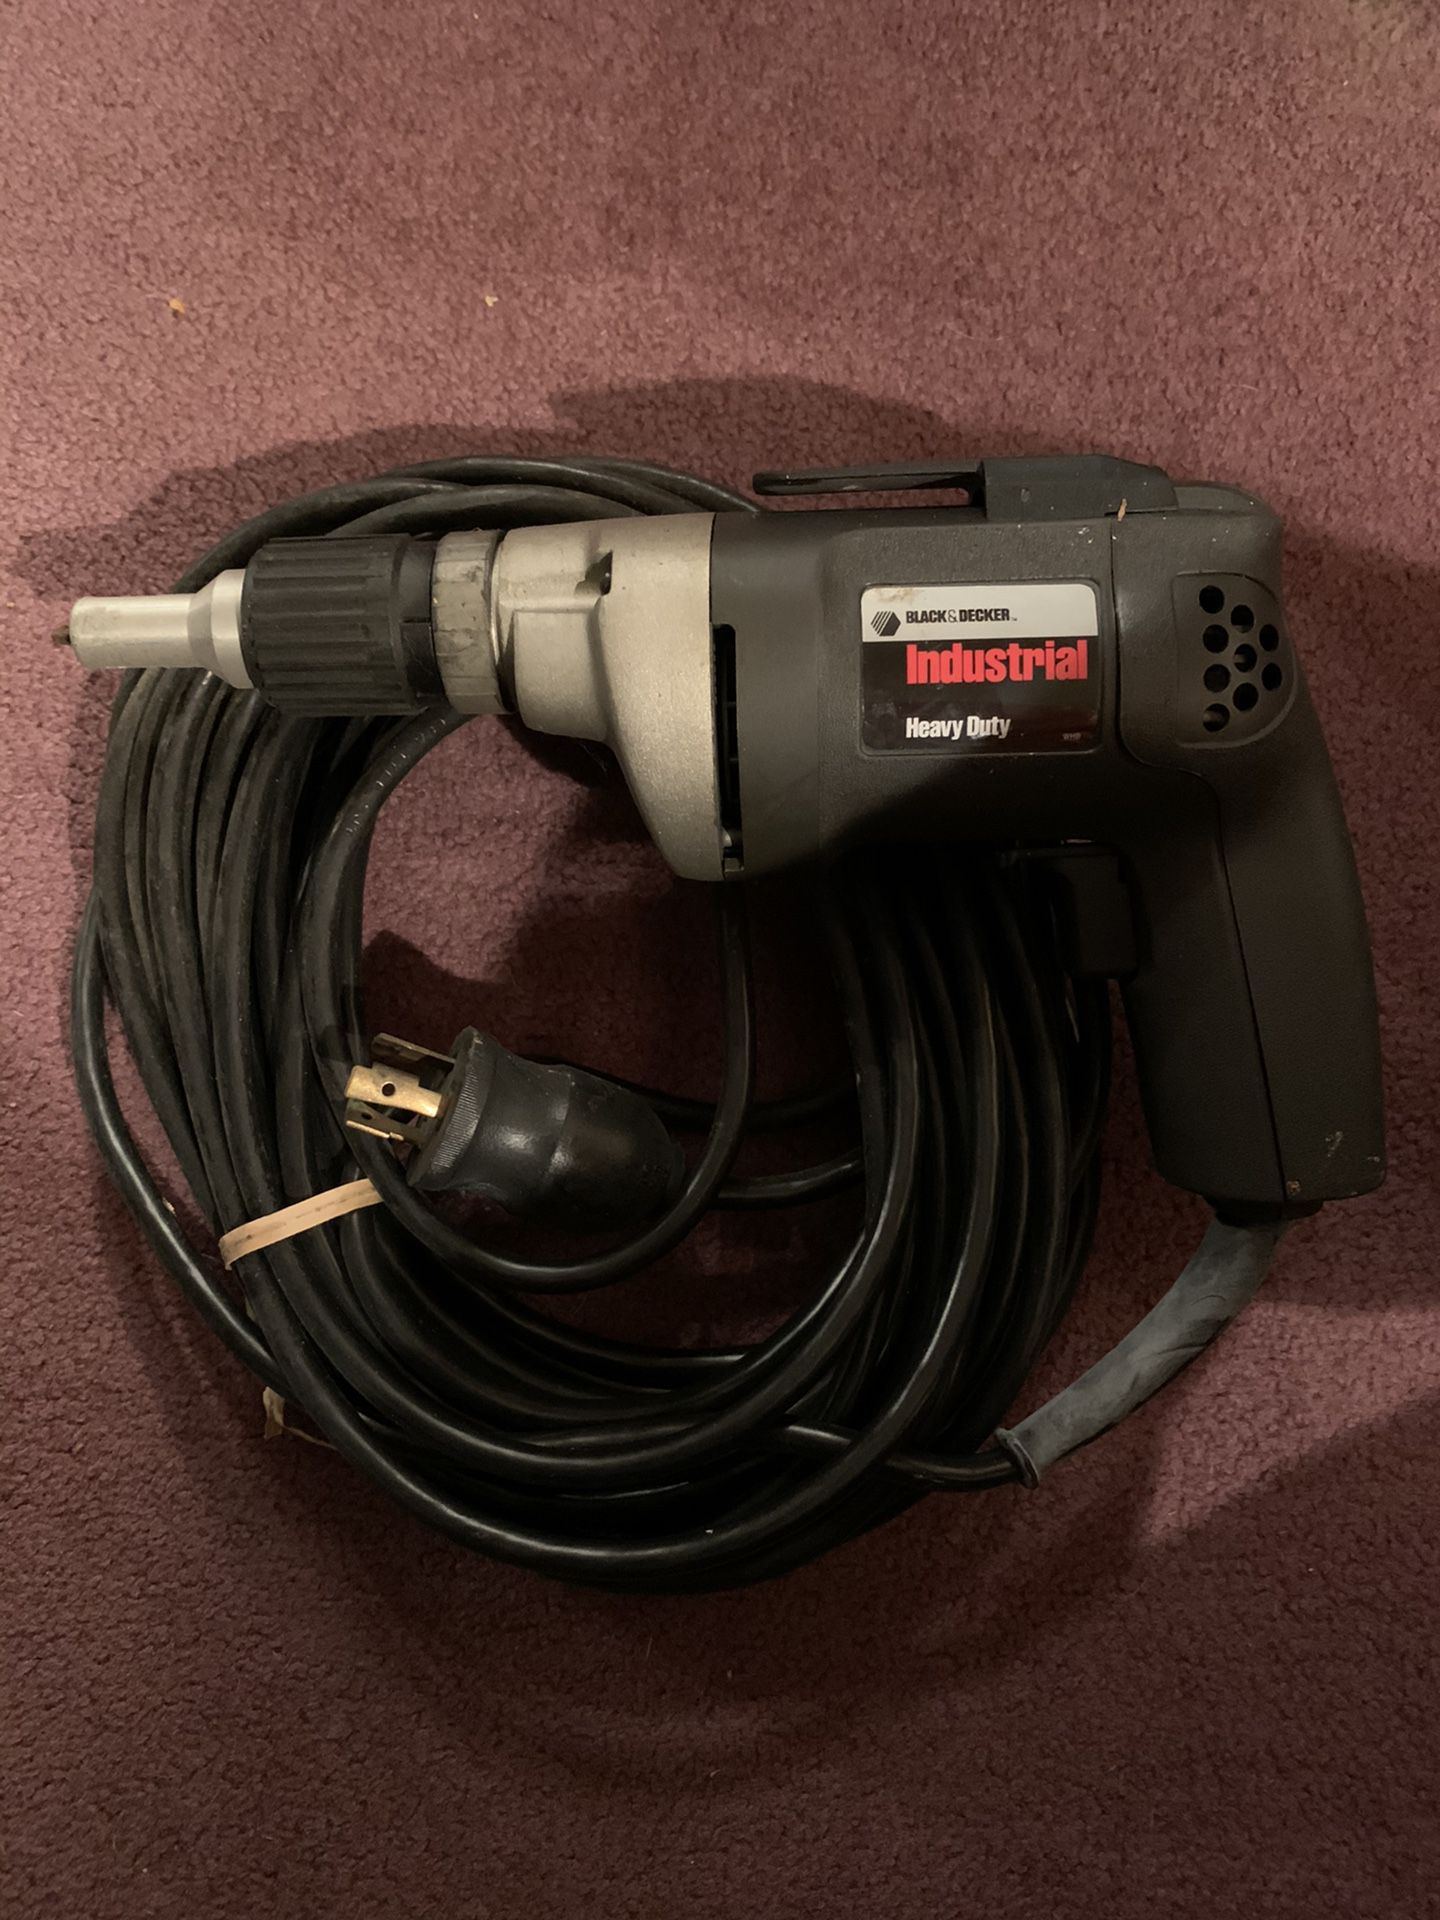 BLACK+DECKER 20V MAX* POWERECONNECT Cordless Drill/Driver + 30 pc. Kit  (LD120VA) for Sale in Queens, NY - OfferUp